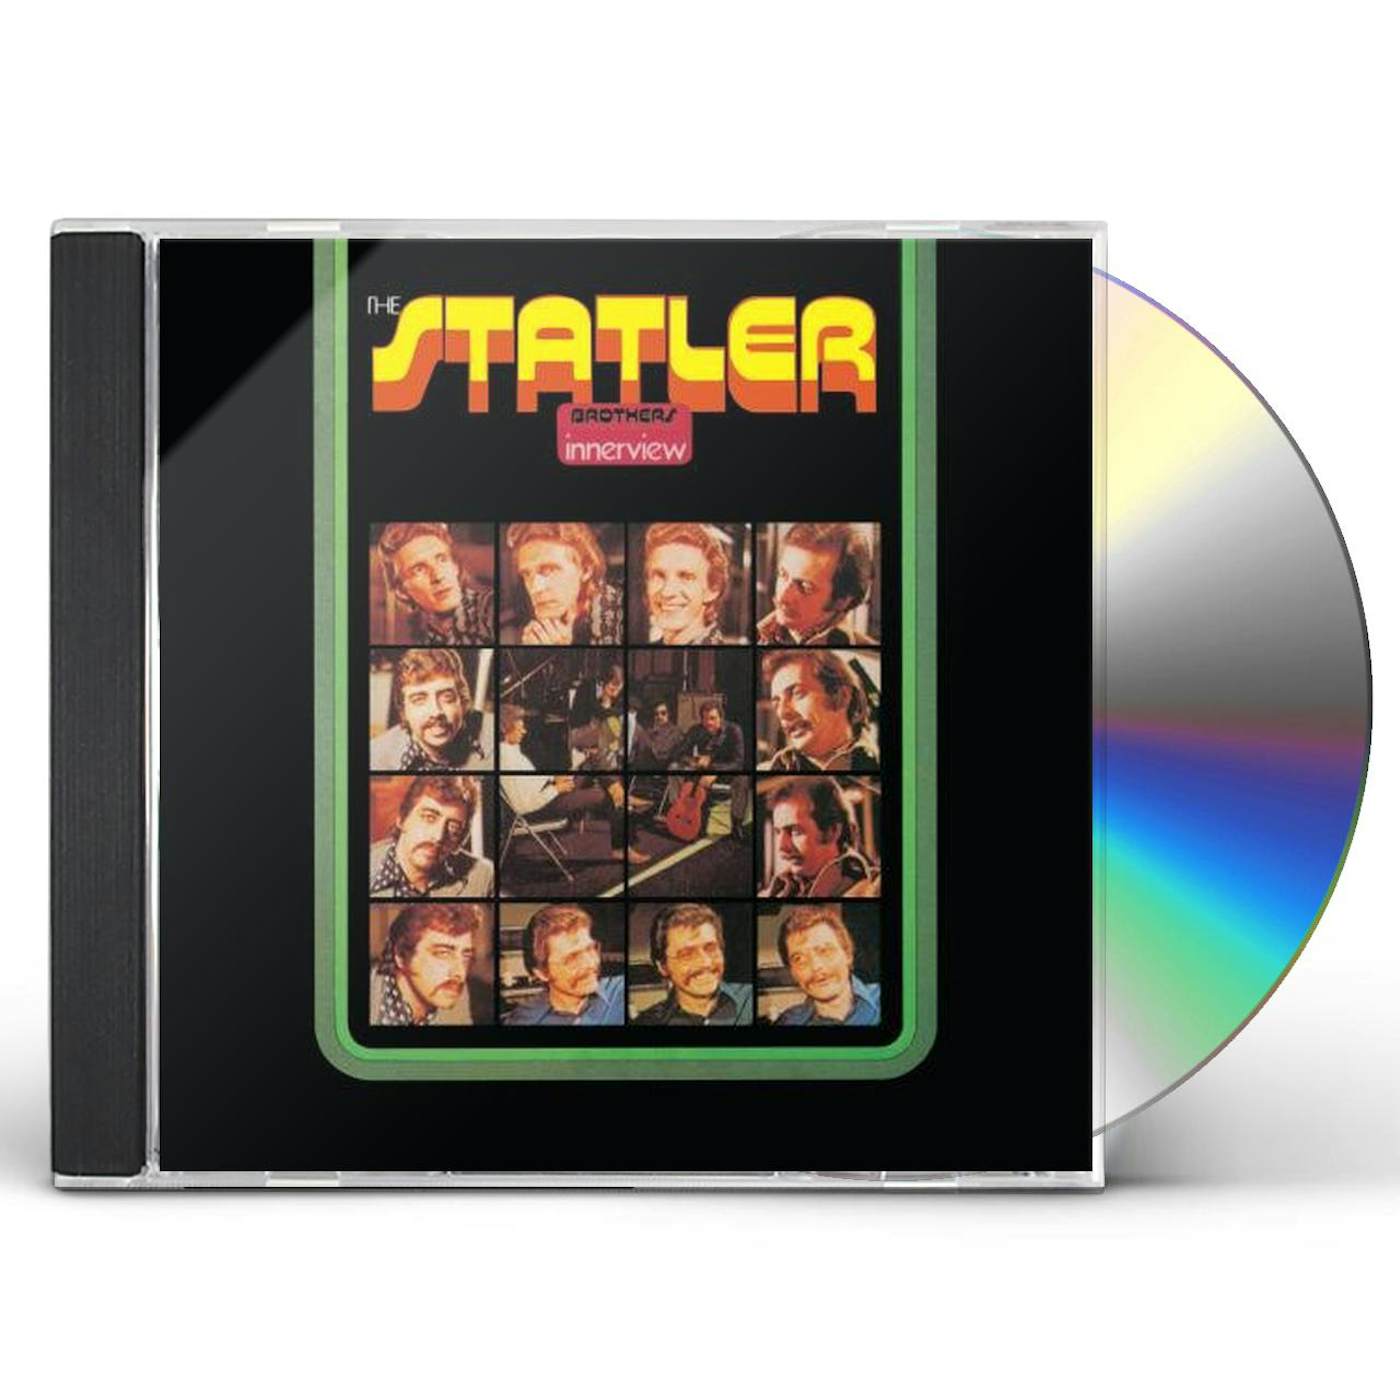 The Statler Brothers INNERVIEW CD